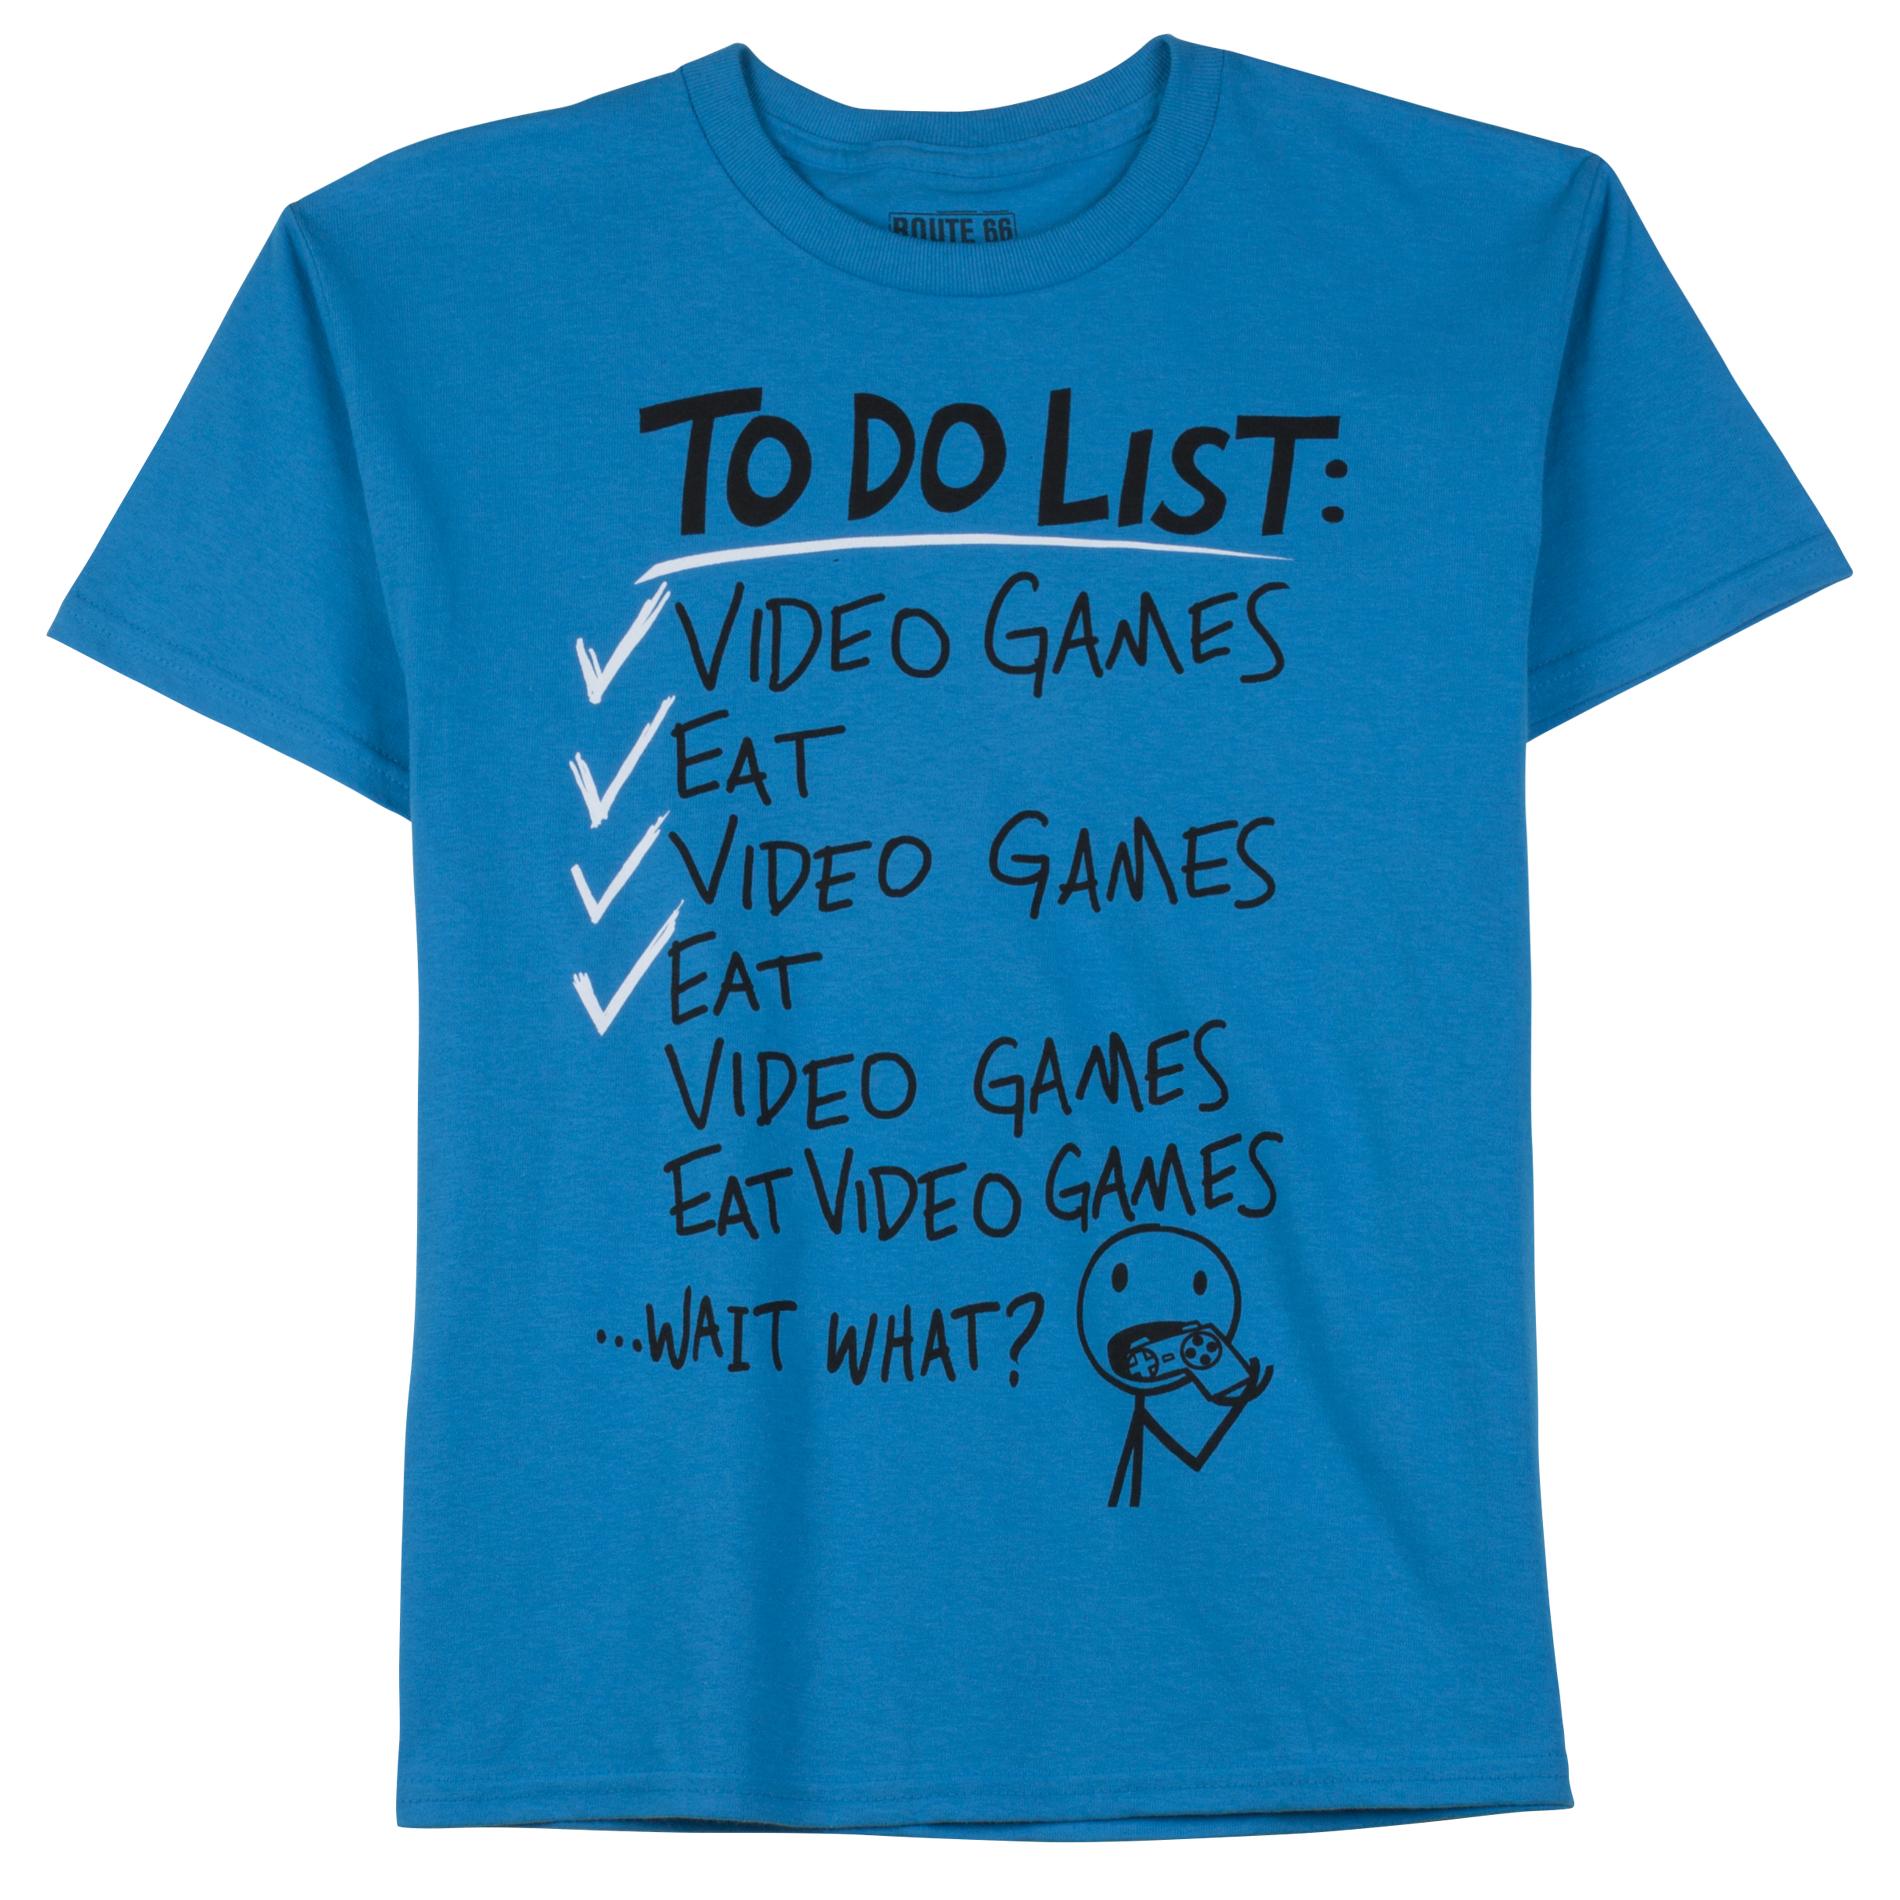 Route 66 Boy's Graphic T-Shirt - Video Game To Do List